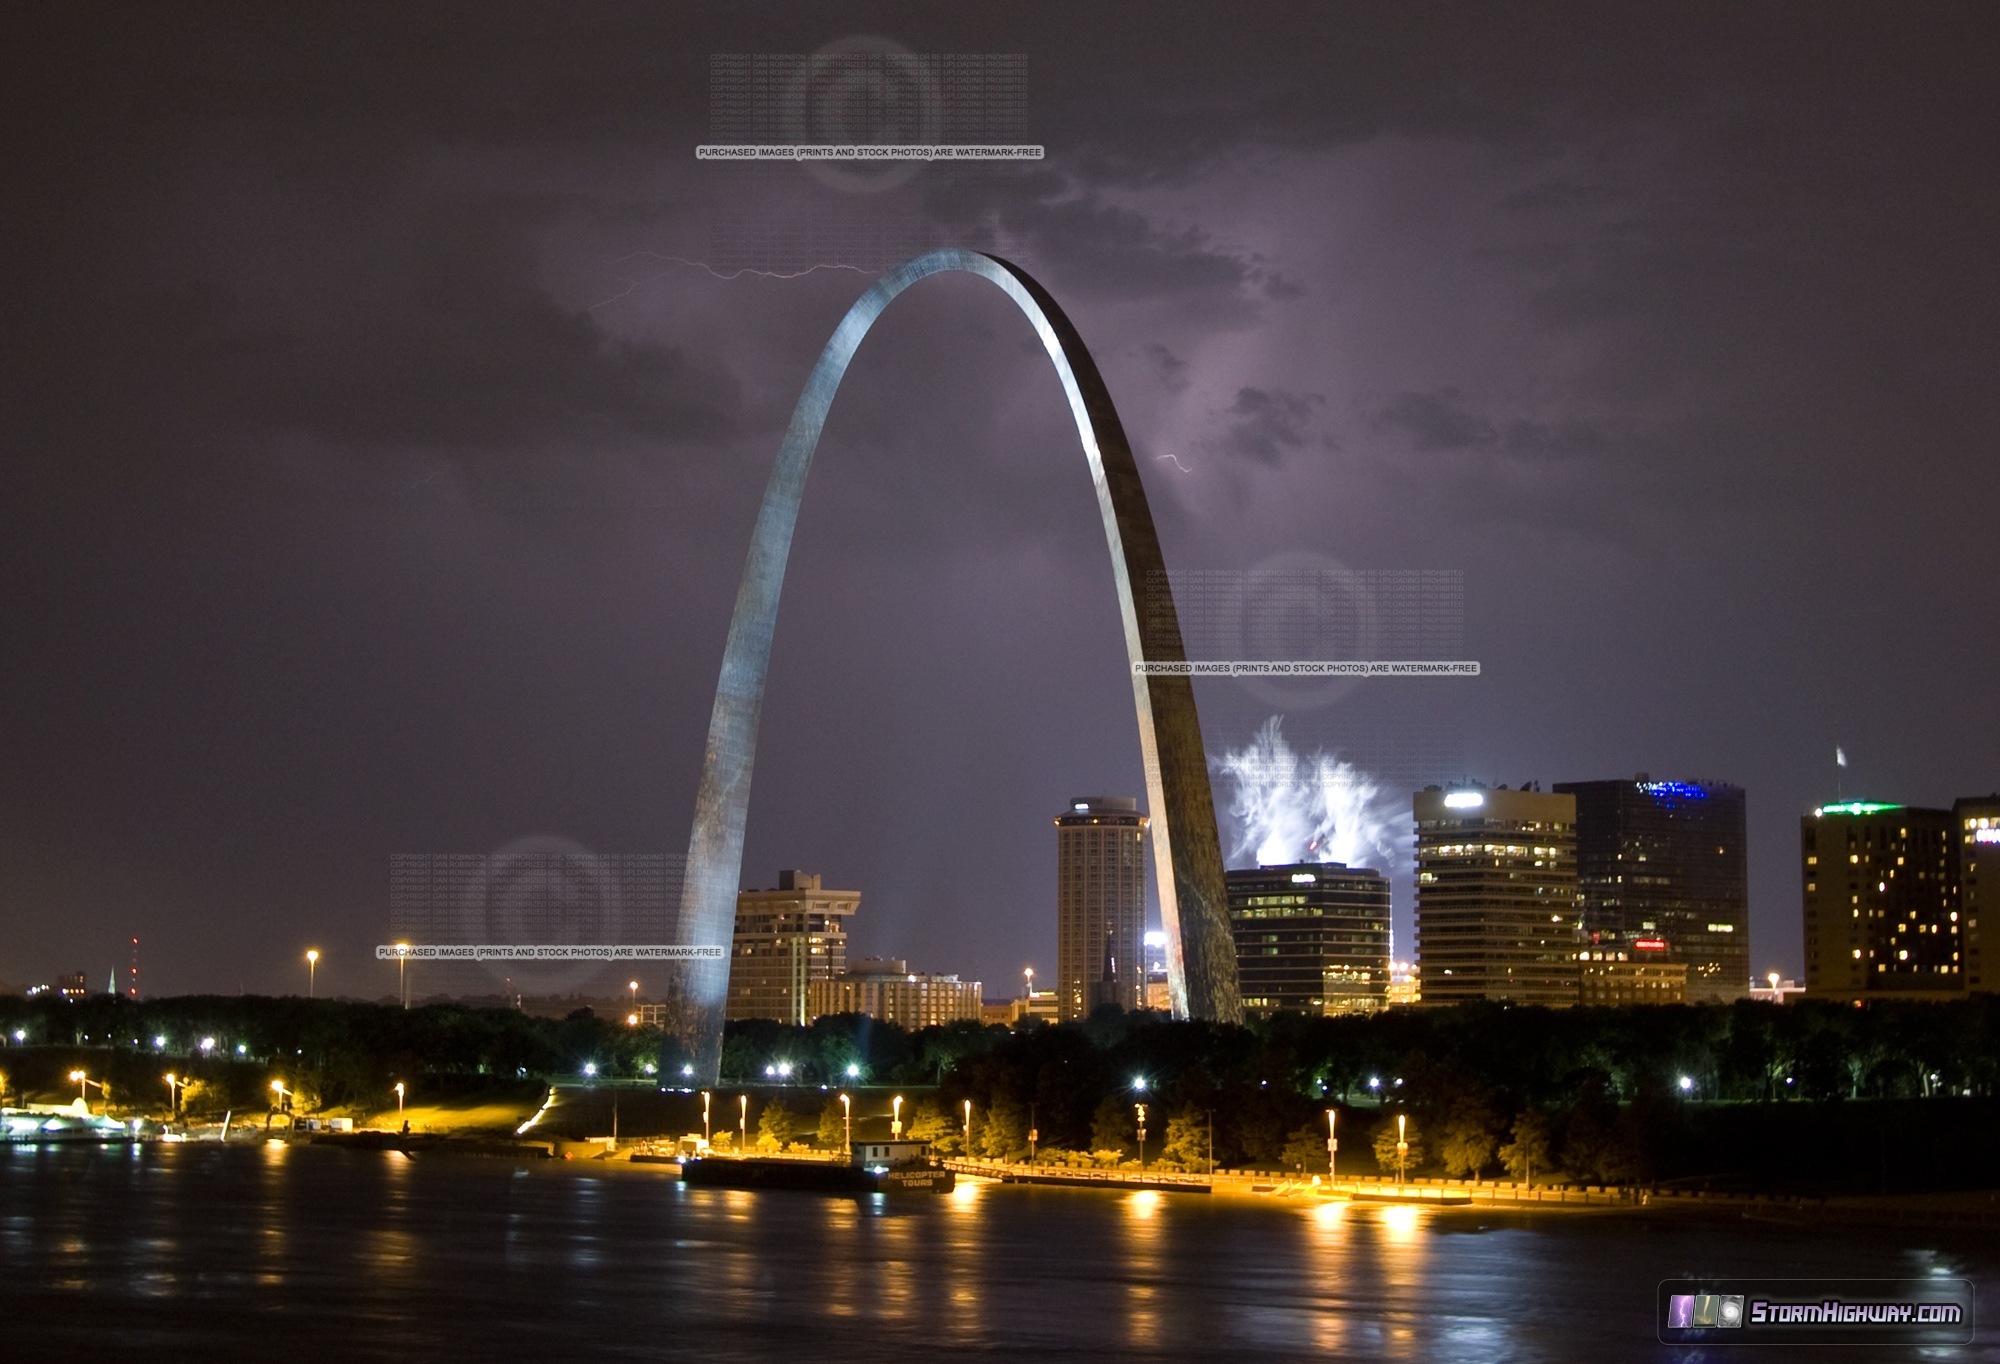 Lightning and fireworks with the Gateway Arch - July 8, 2014